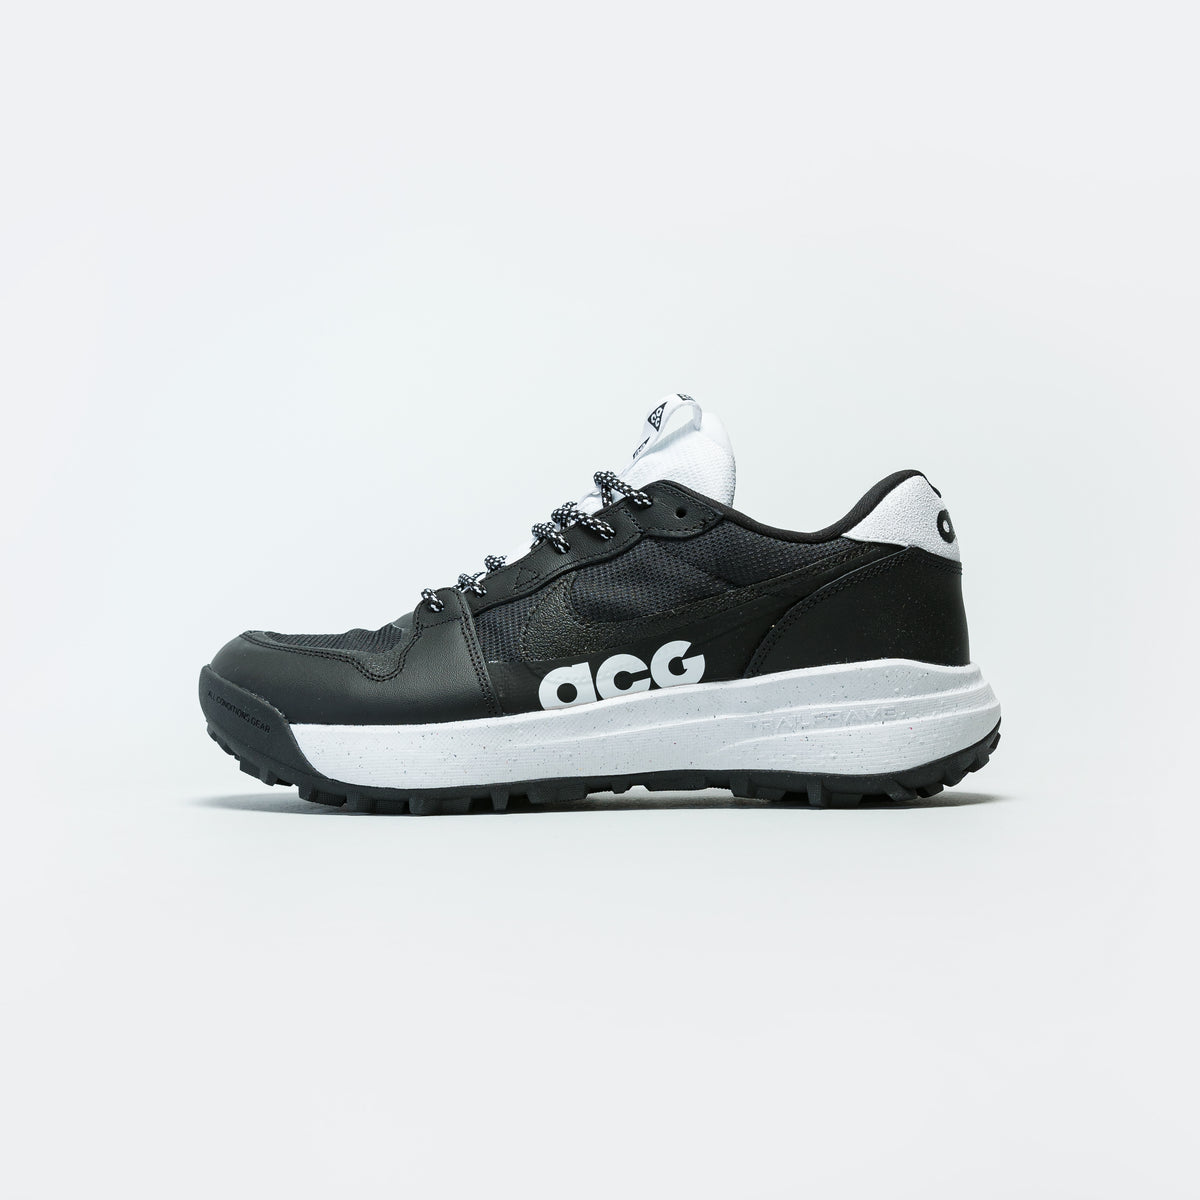 Nike ACG Lowcate - Black/White | Up There Store | UP THERE